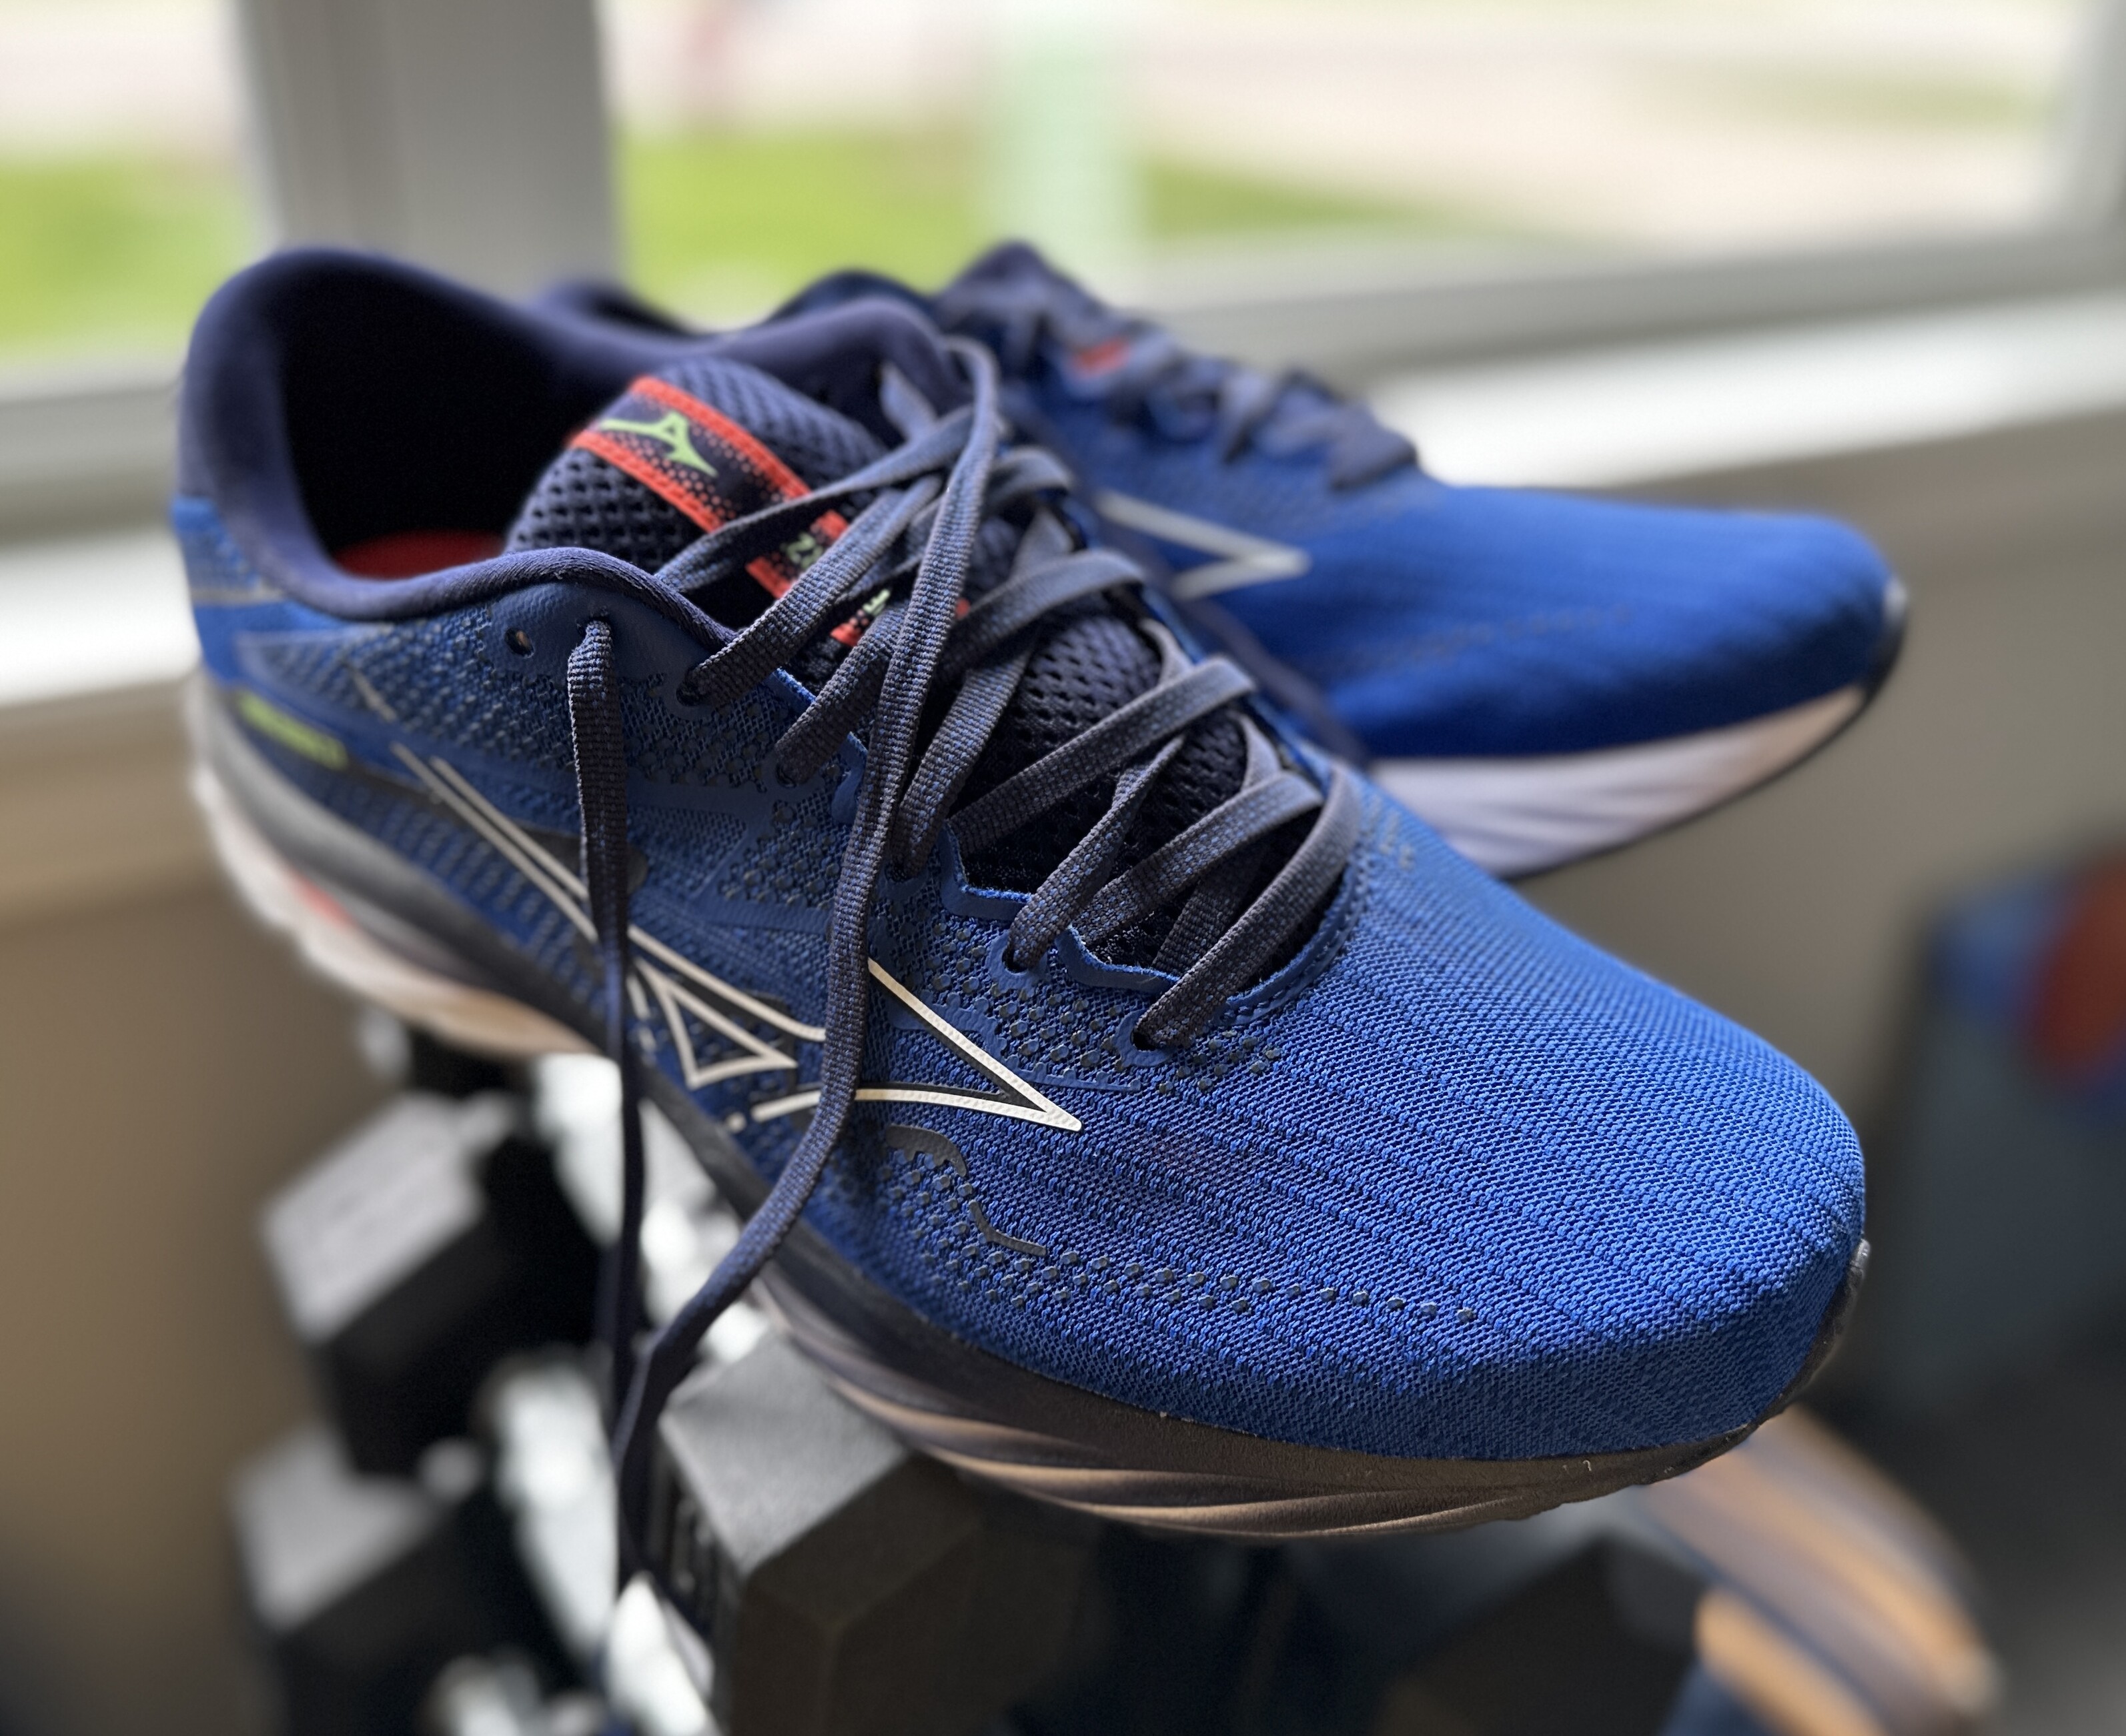 Blue Mizuno Wave Rider 27 running shoes sitting by the window of my office